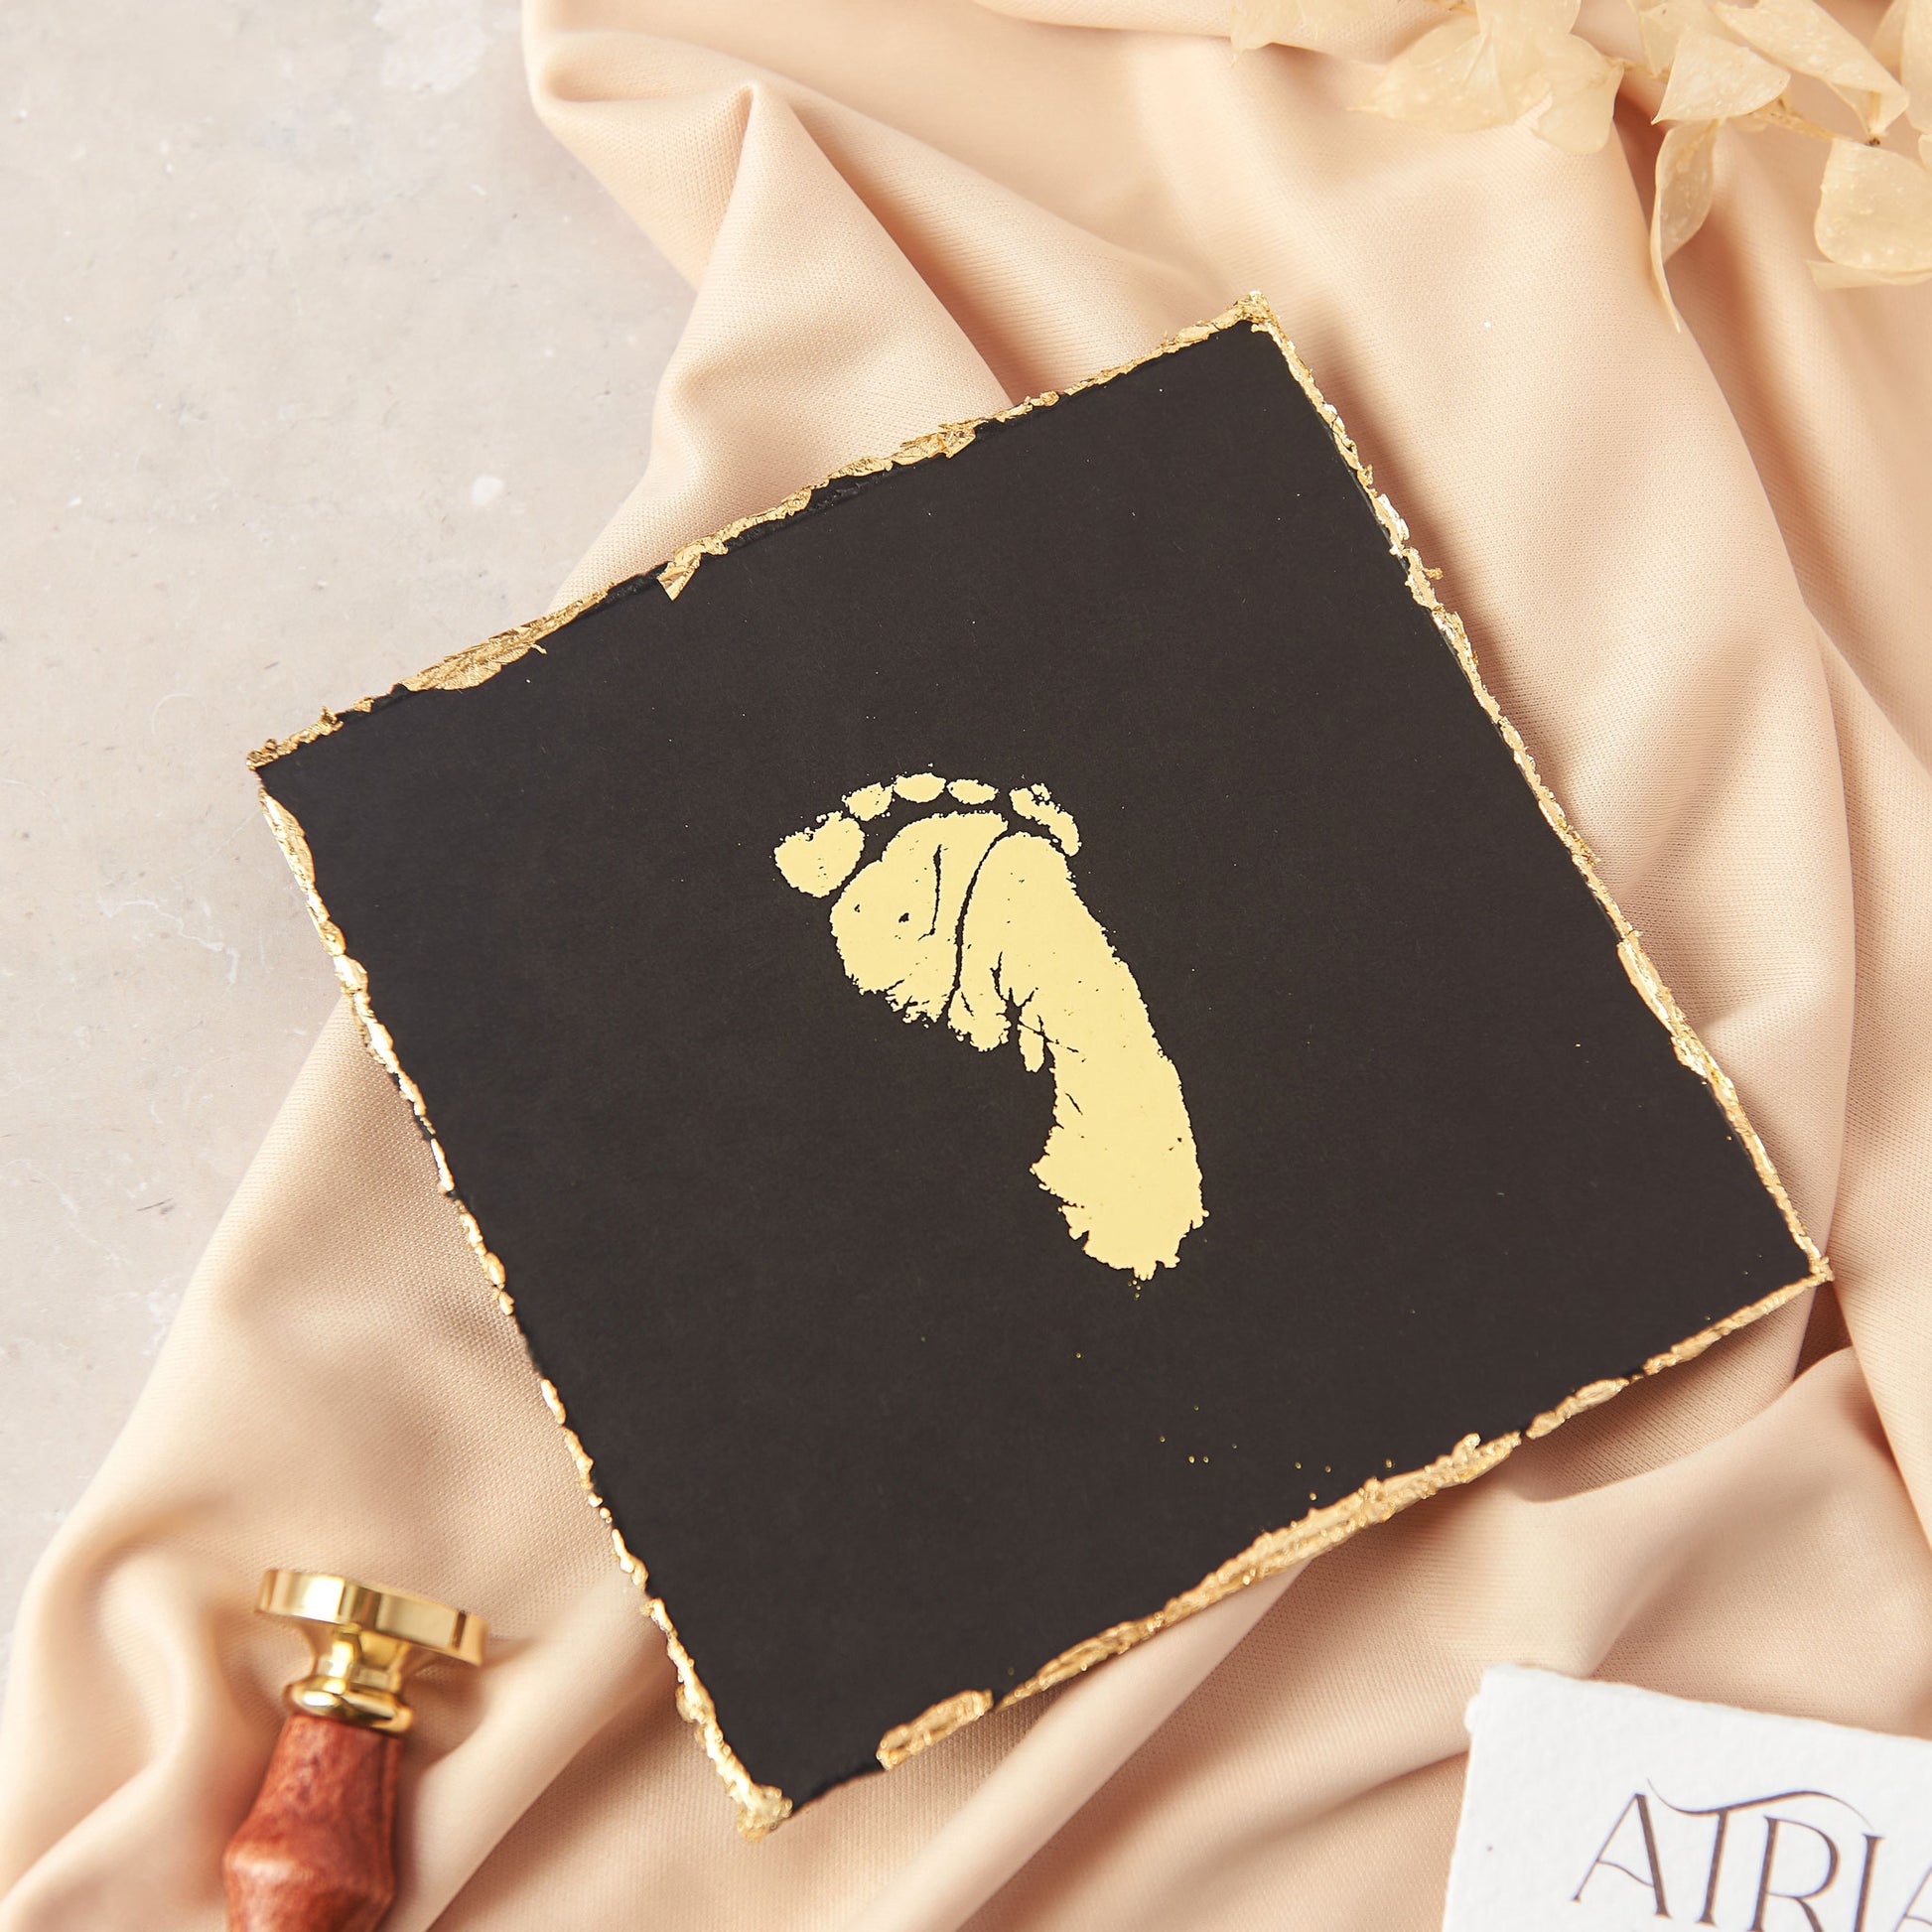 This photograph shows a baby's footprint which has been recreated in gold foil on to black cardstock. The paper keepsake is 5 inches square and has been finished with a hand deckled gold gilded edge which is an add on option to a standard foil print keepsake. The keepsake is shown on a draped neutral fabric backdrop.